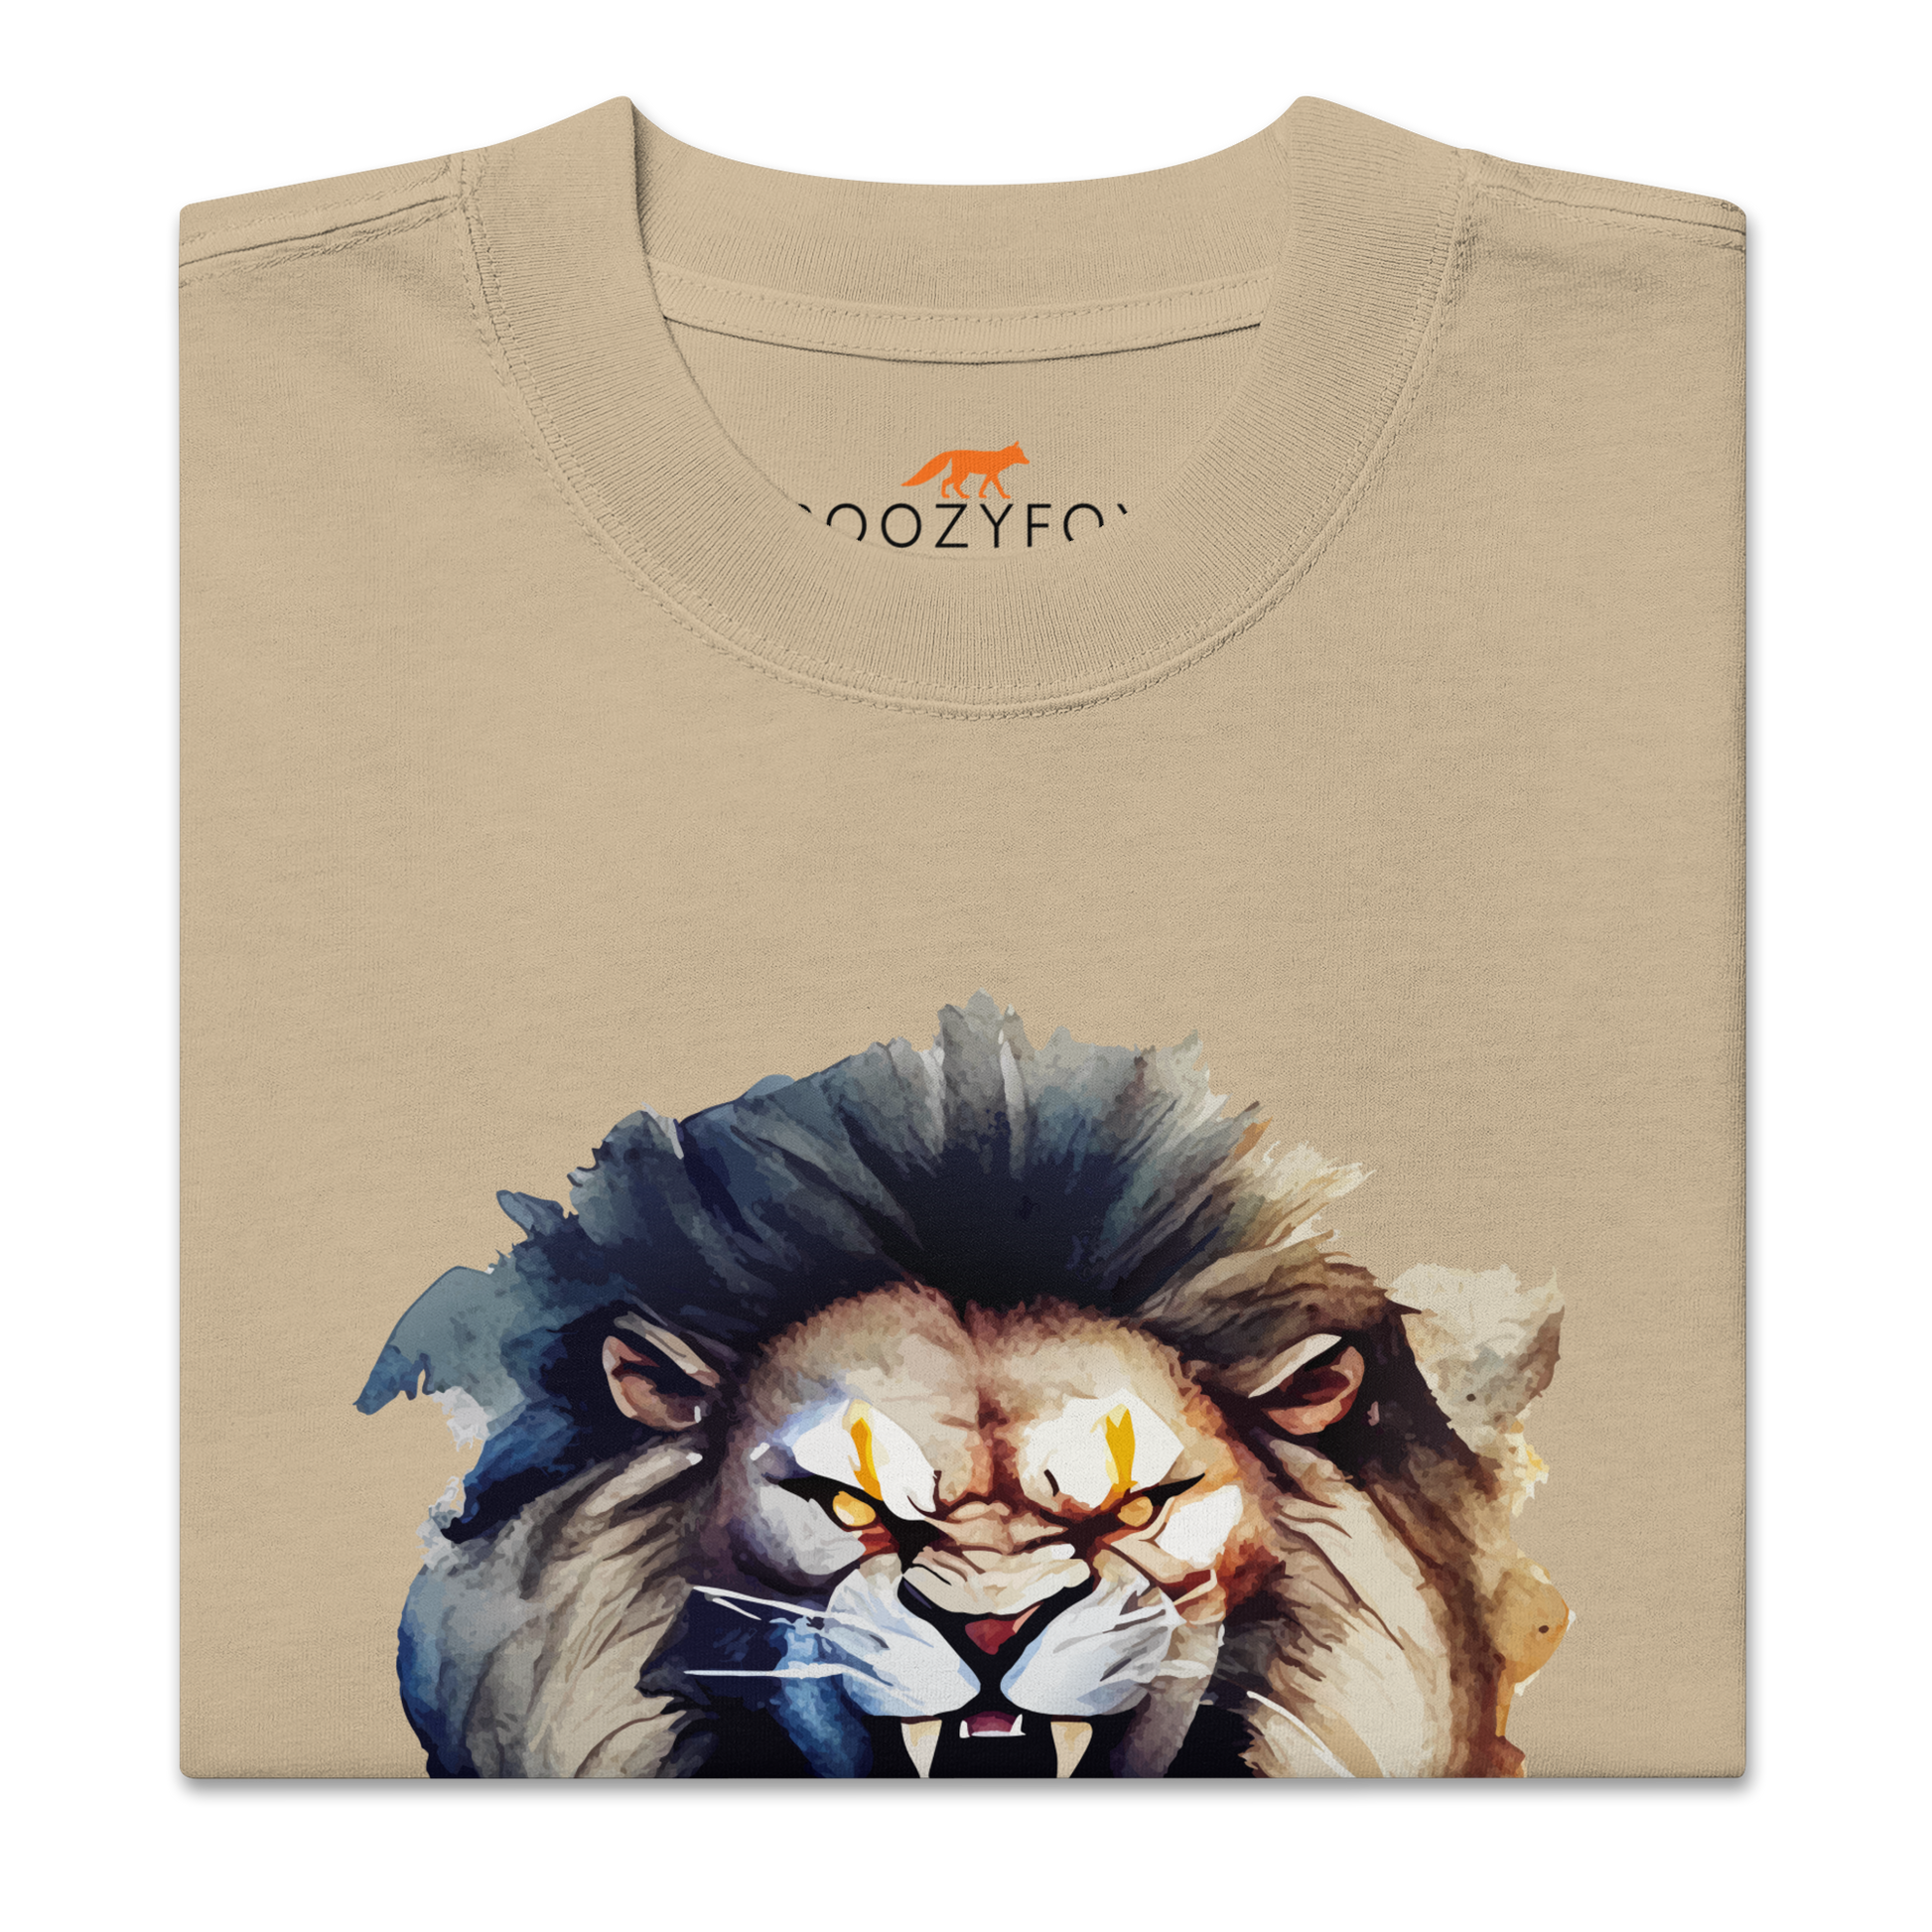 Product details of a Faded Khaki Lion Oversized T-Shirt featuring a Roar-Some graphic on the chest - Cool Graphic Lion Oversized Tees - Boozy Fox